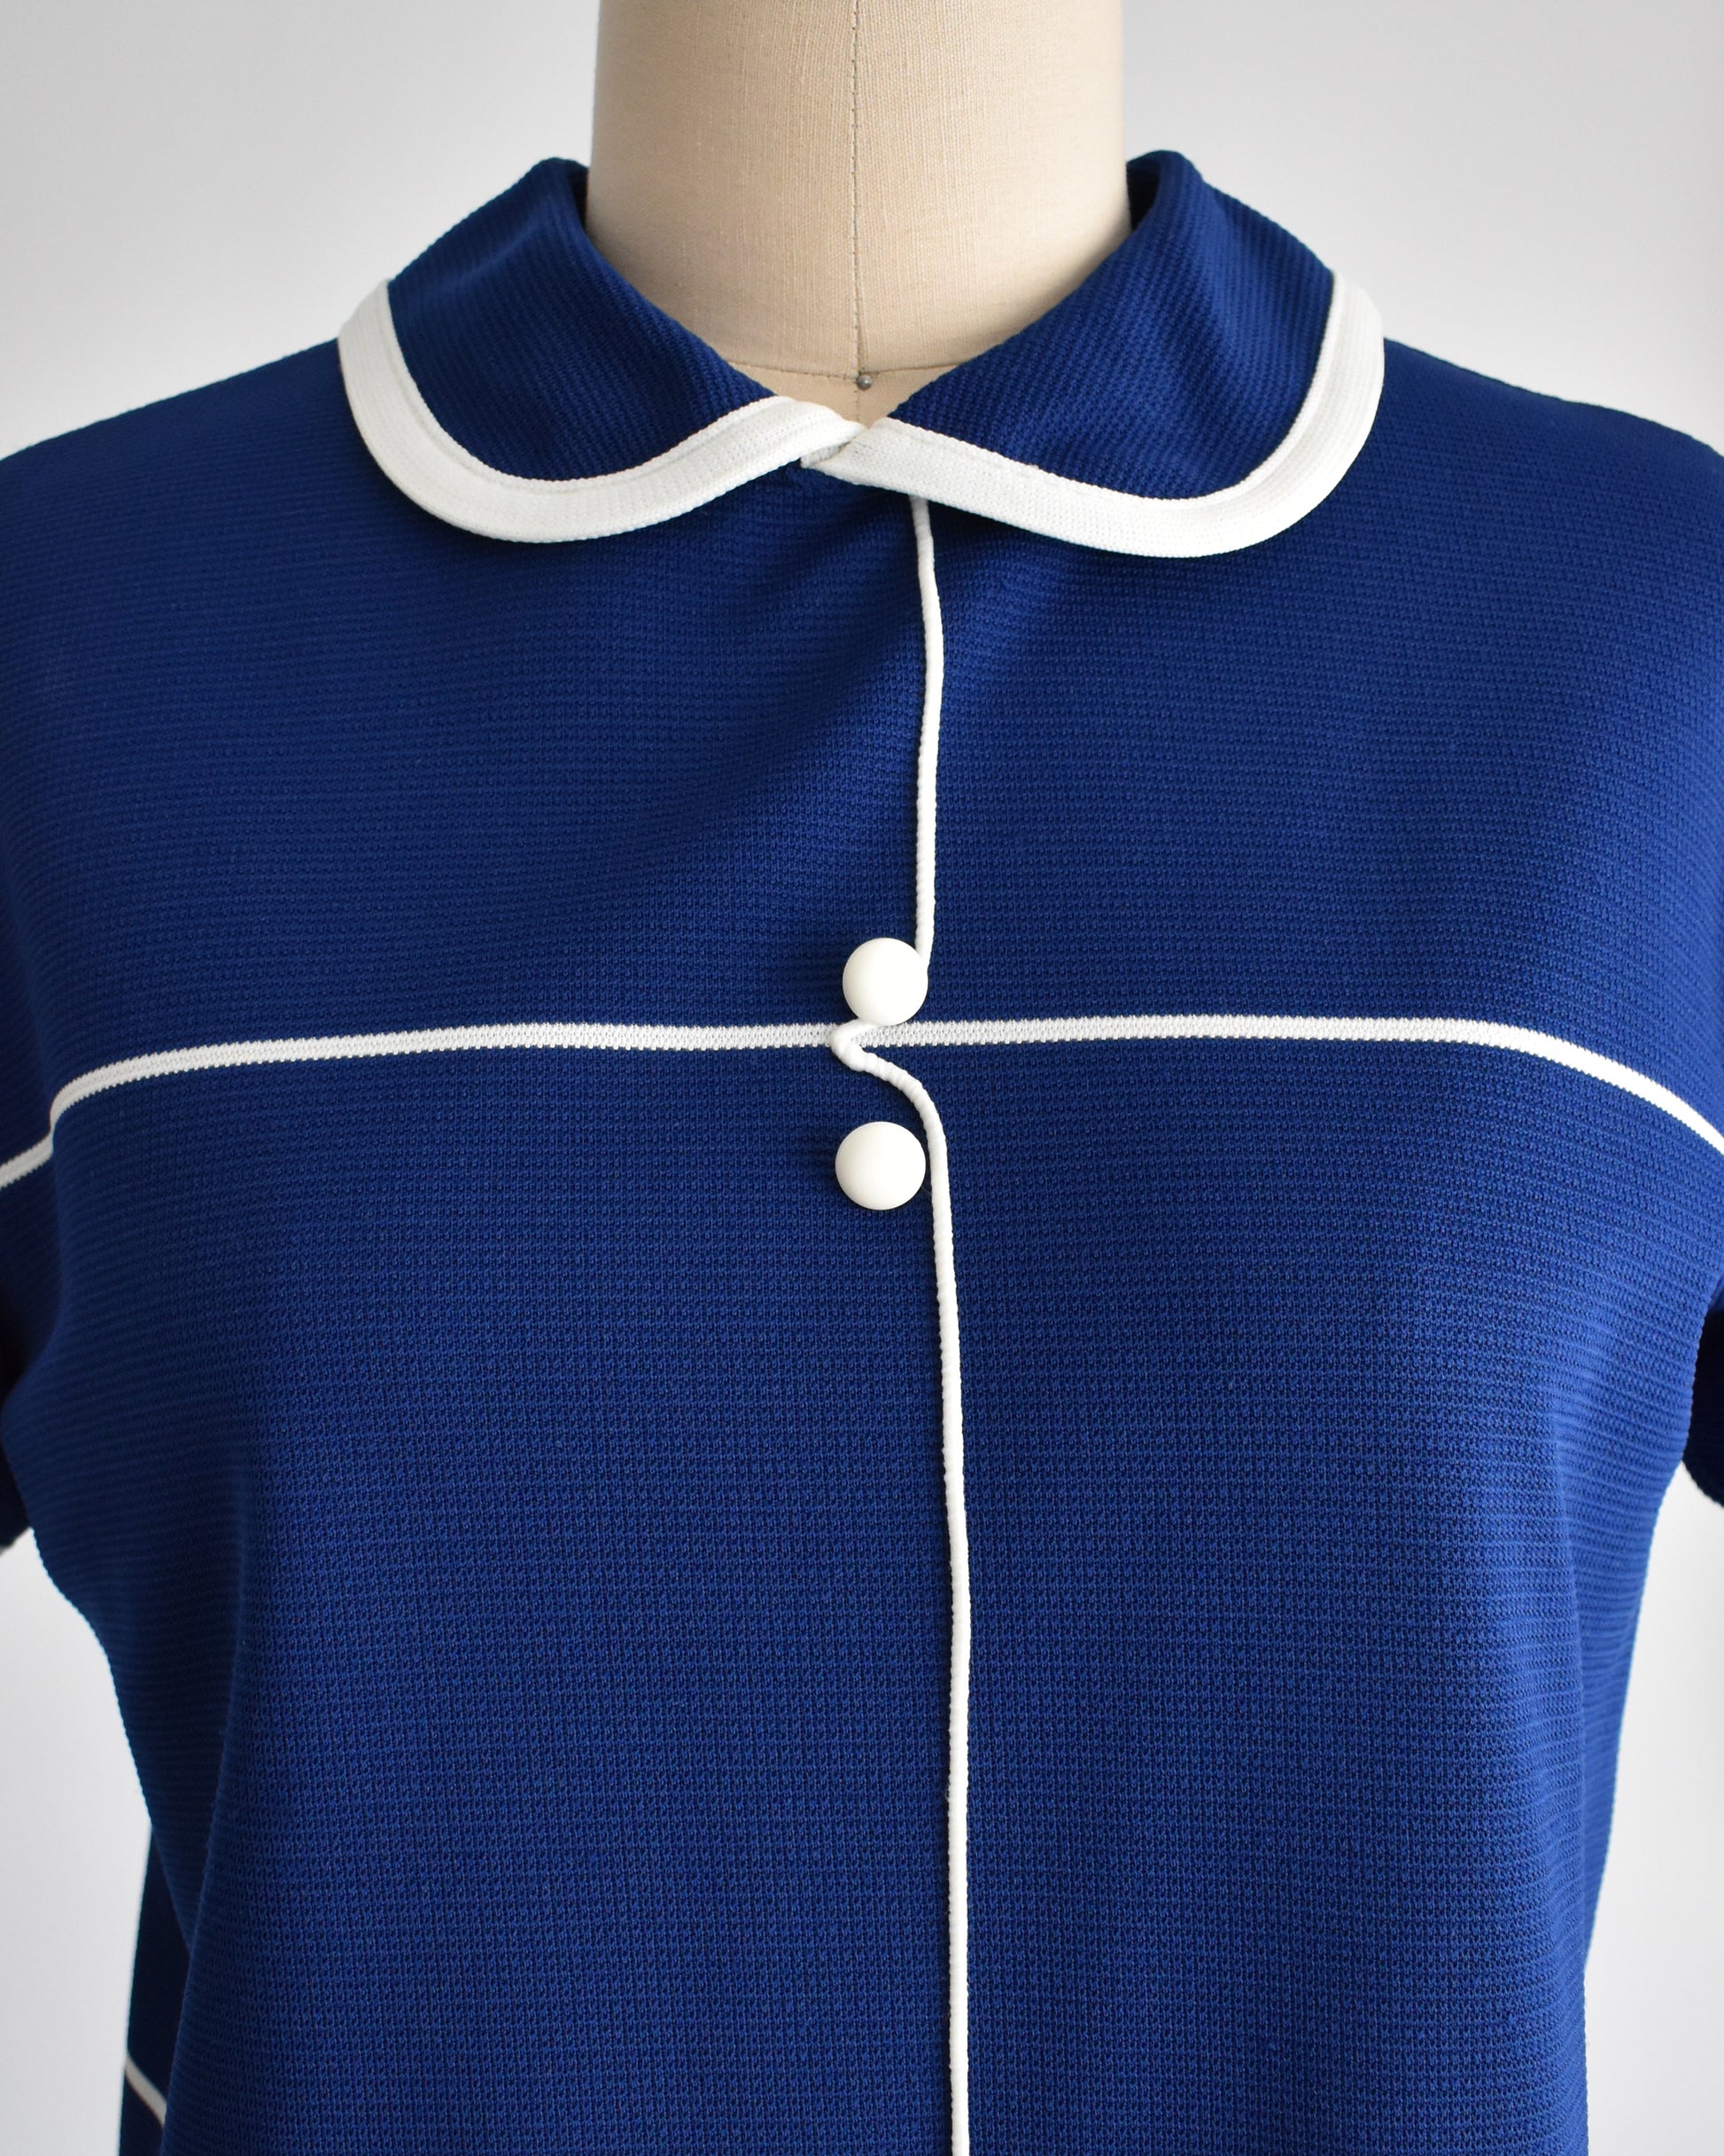 Close up of the navy blue knit, Peter Pan collar, white stripes, and button accents.